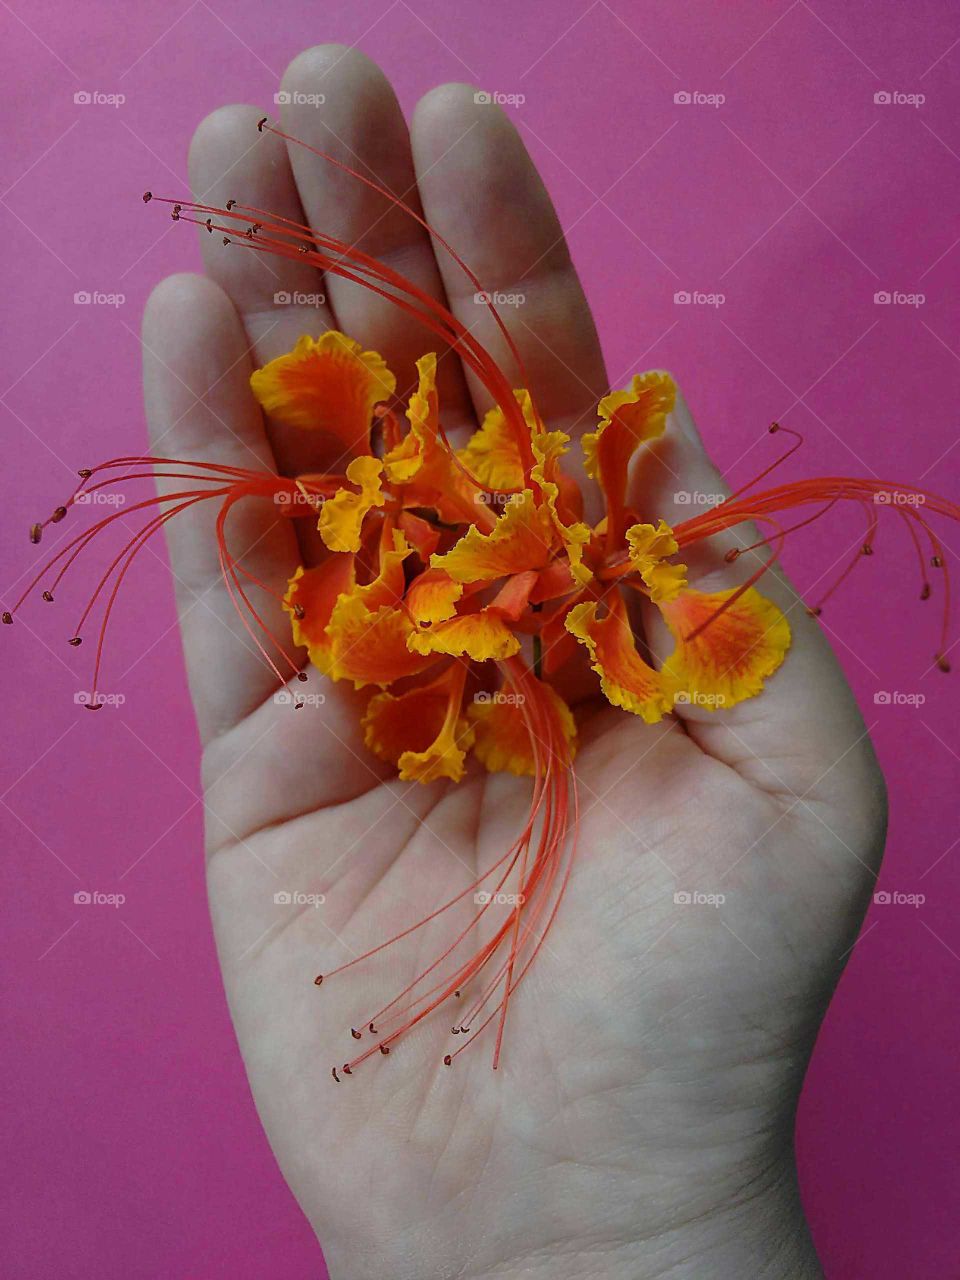 Female hand holding small flowers (Poinciana).